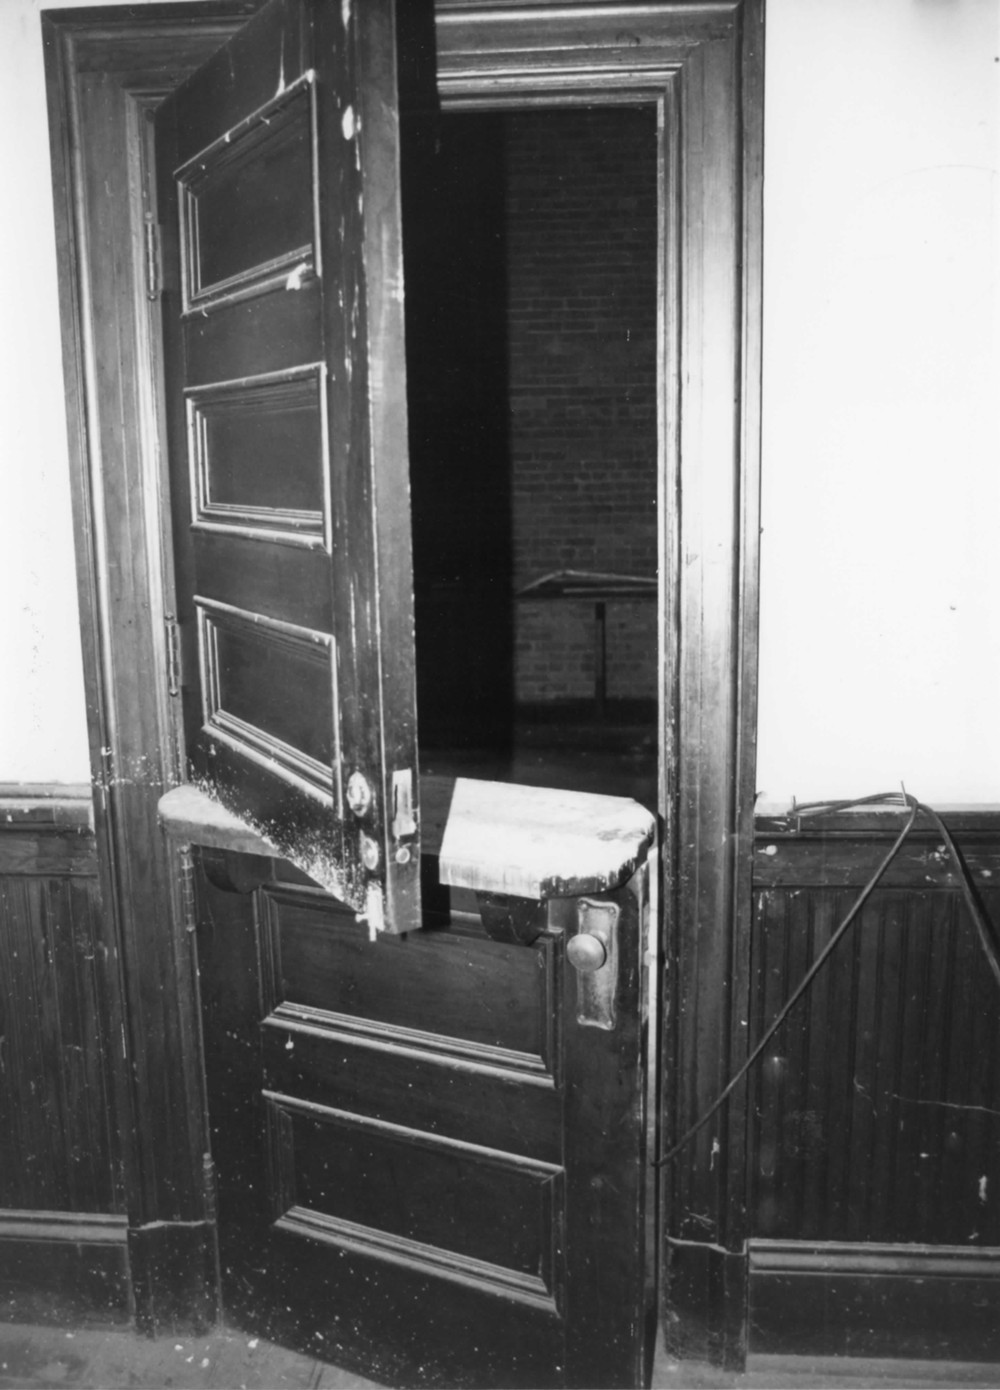 Wellsville Erie Depot, Wellsville New York Door to the baggage room and mail room from inside communications room (1987)